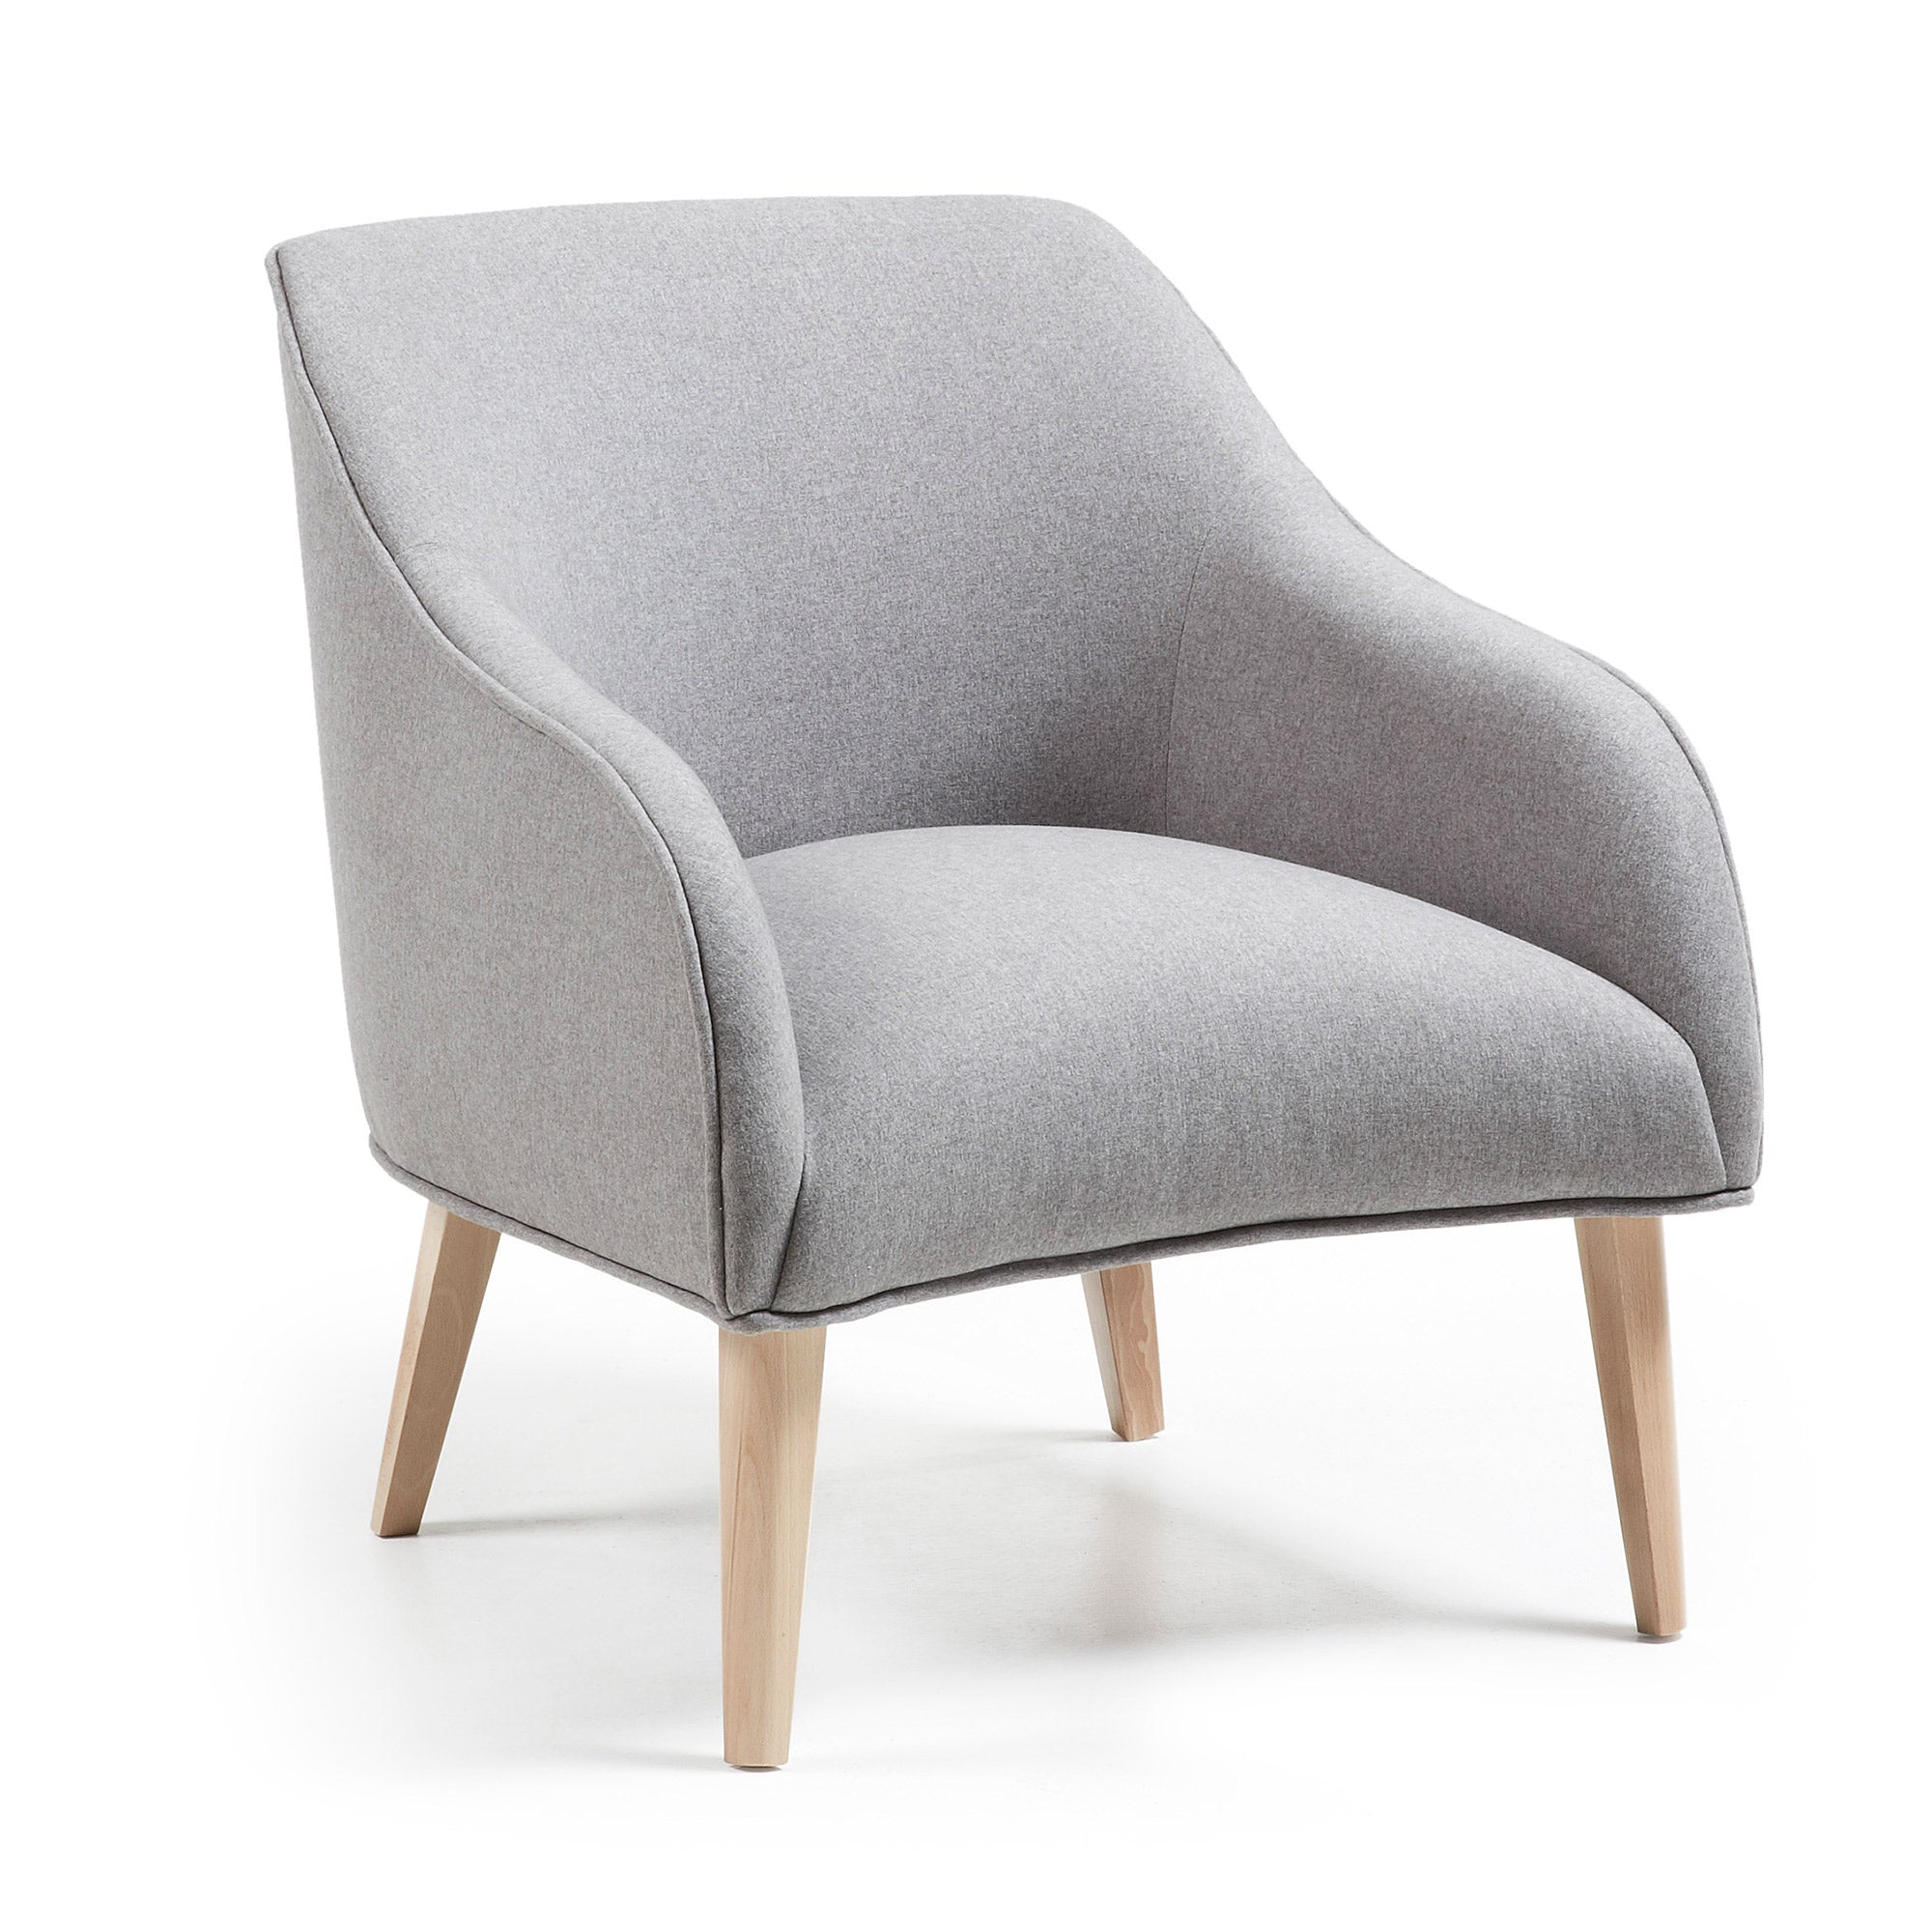 Bobly armchair in grey with wooden legs with natural finish